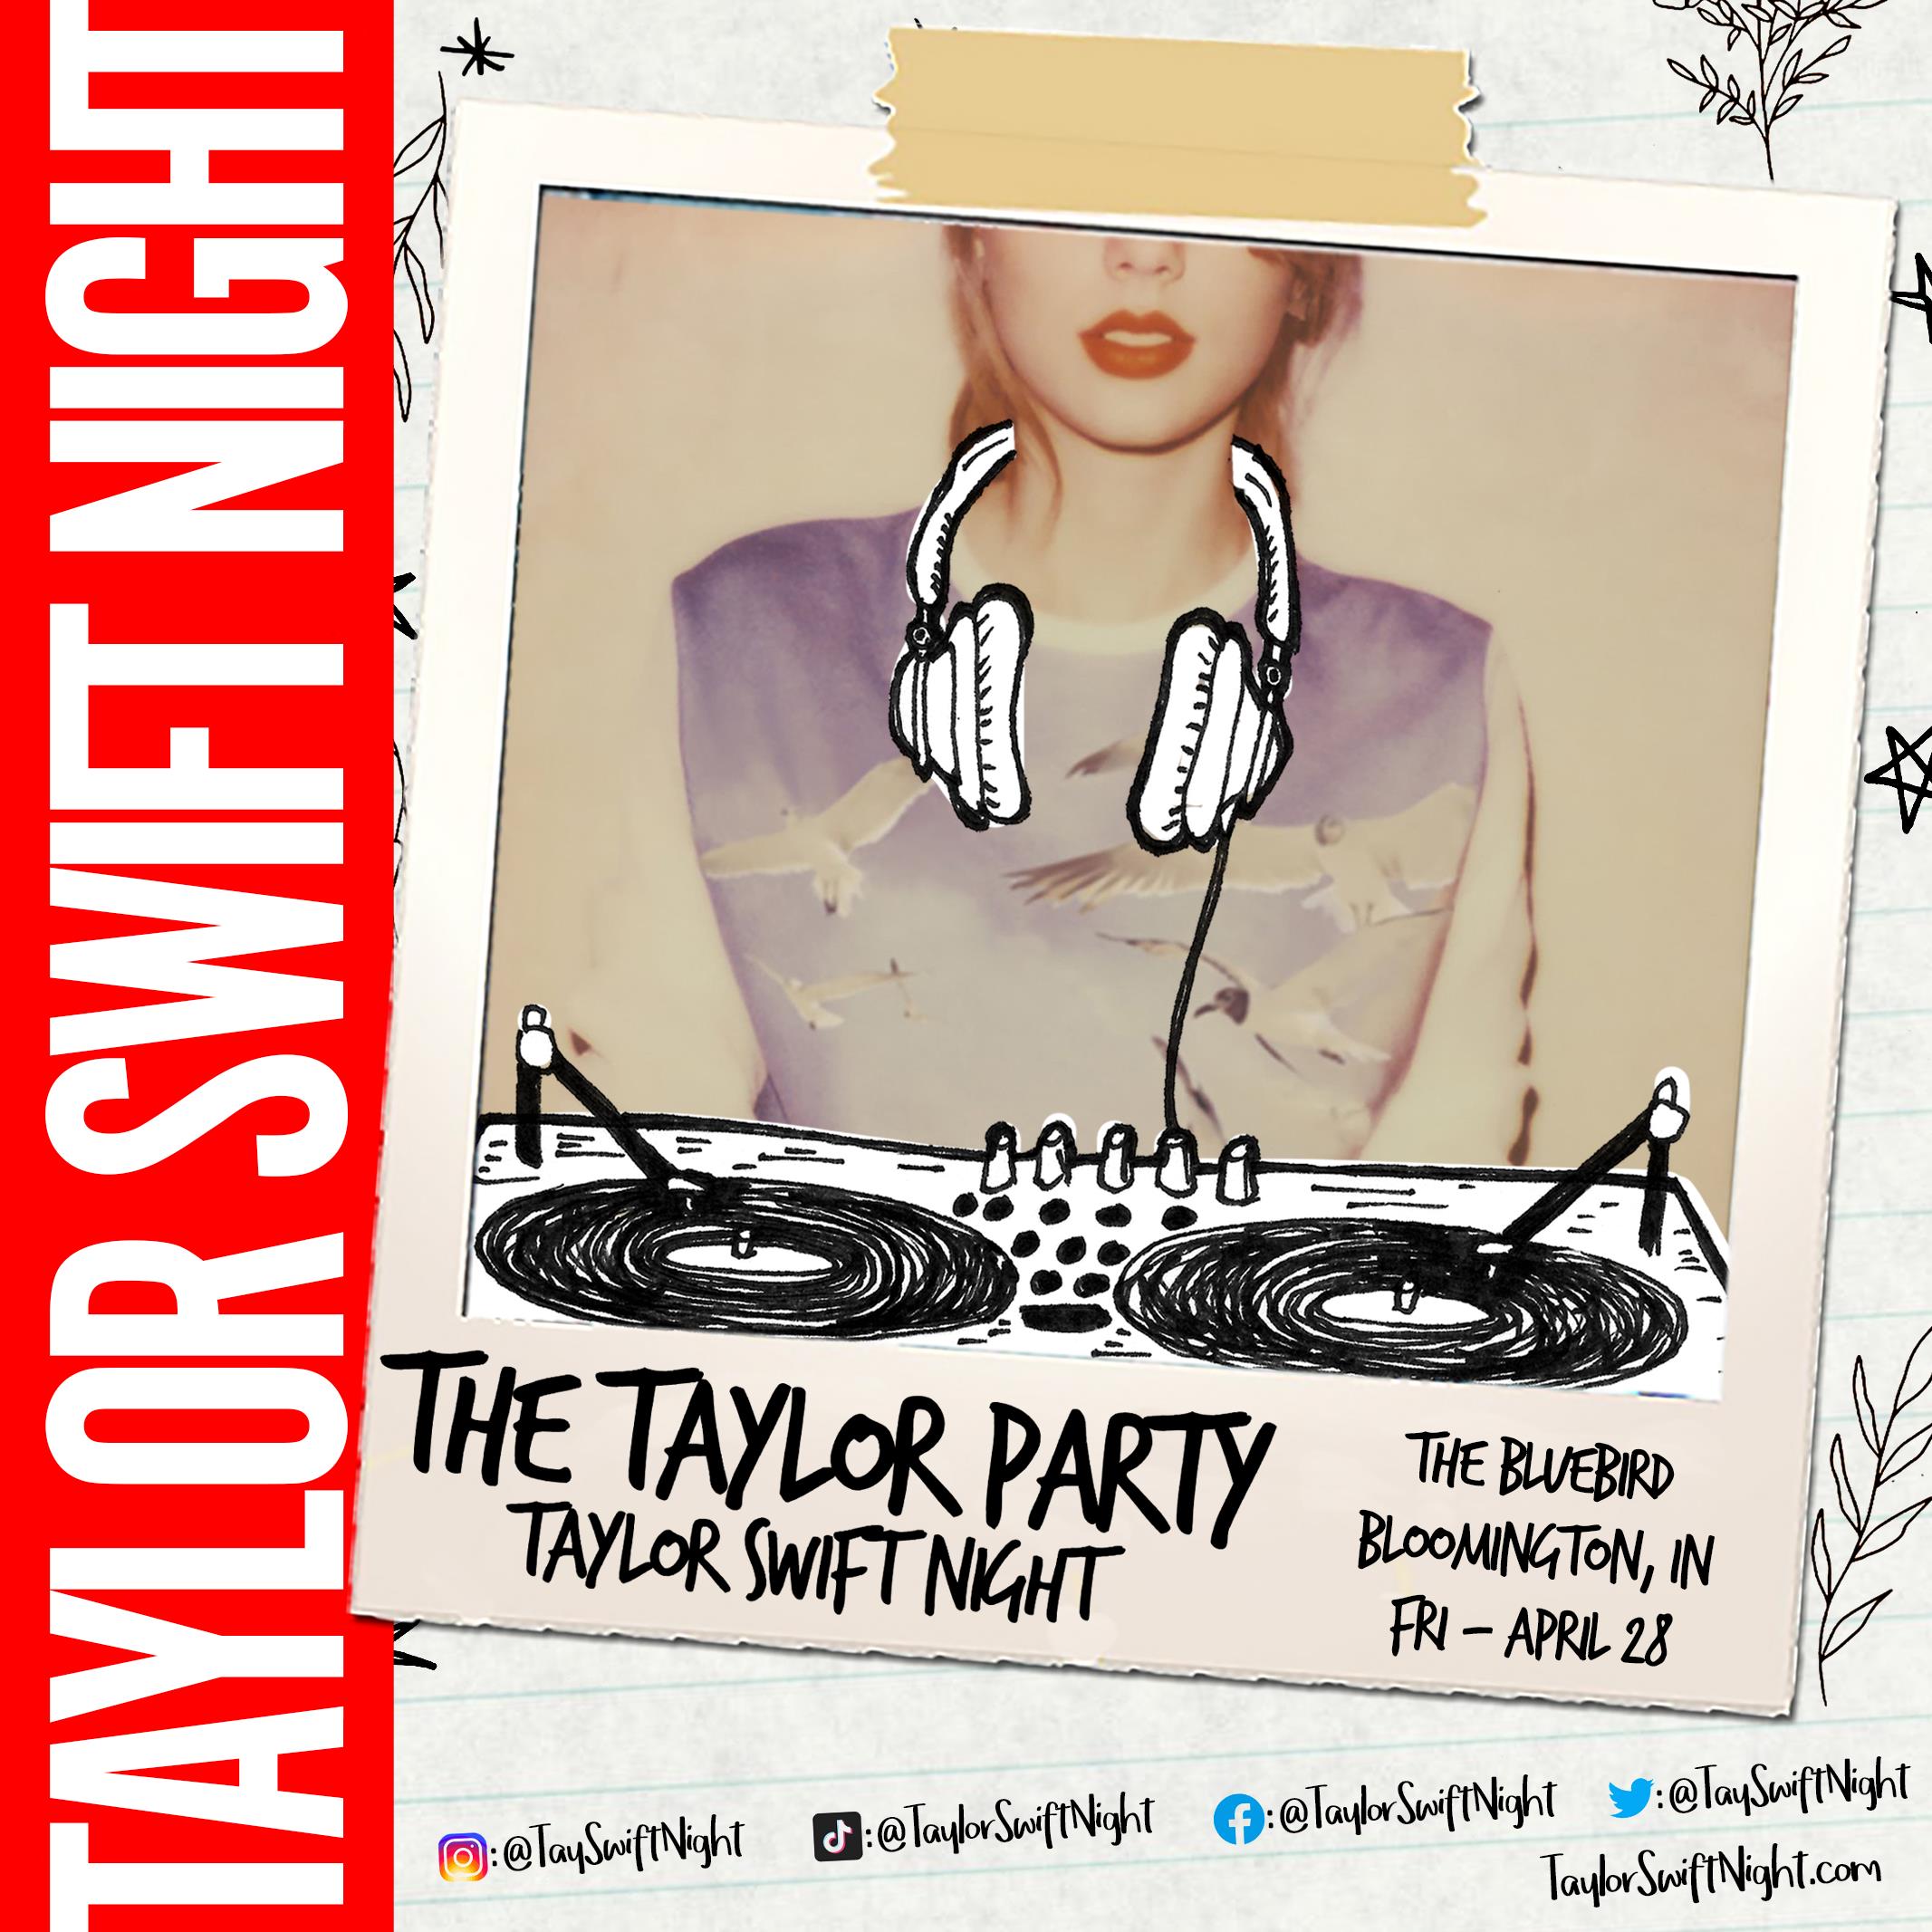 Buy Tickets to Taylor Swift Dance Party in Aurora on Jul 30, 2022